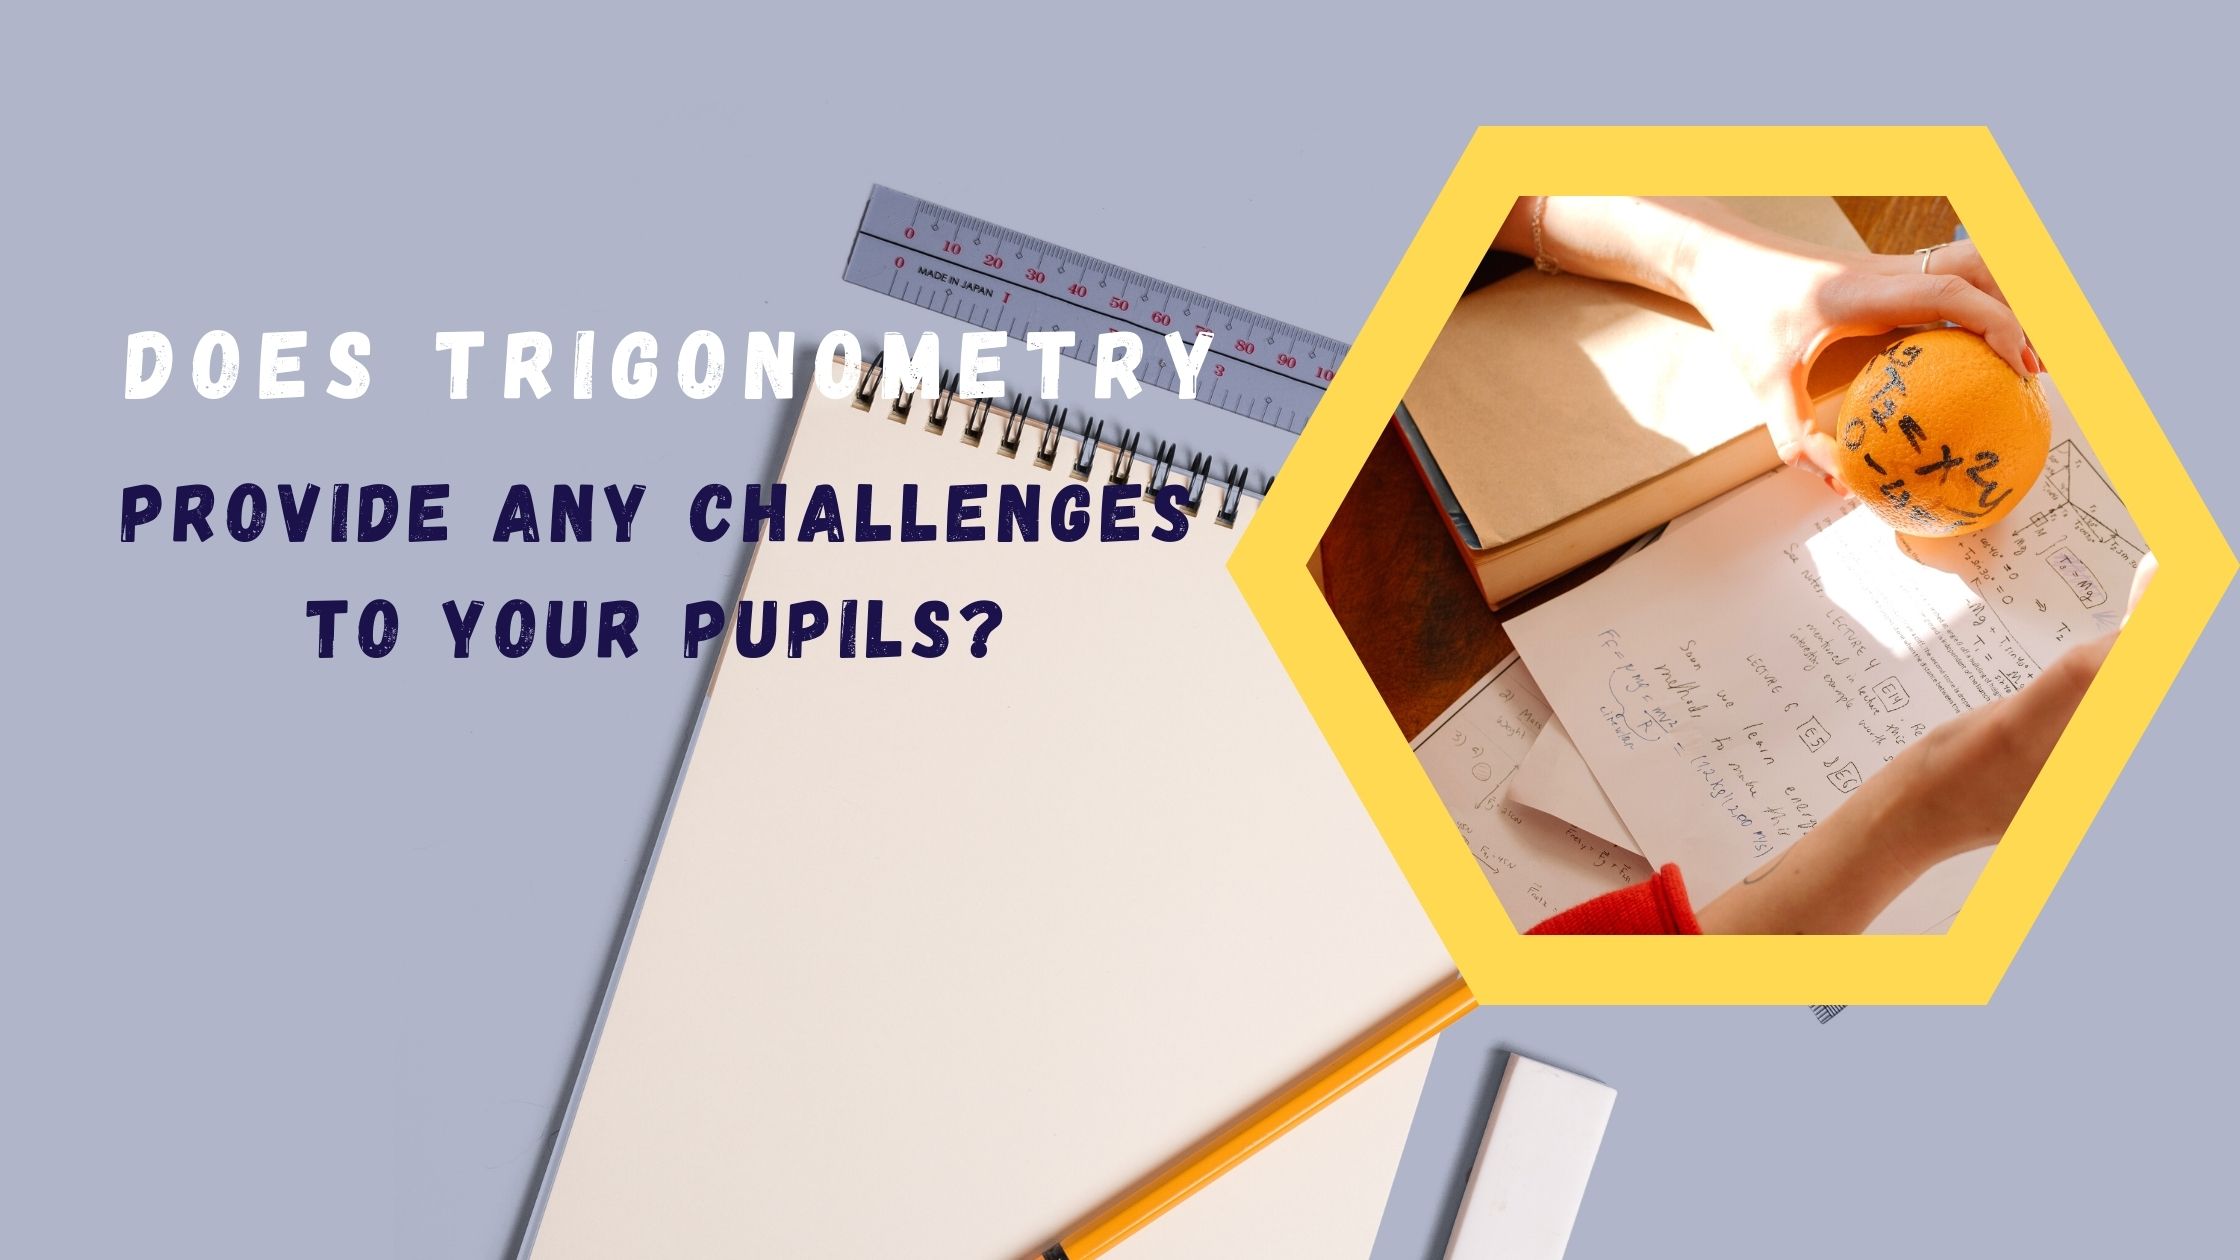 Does trigonometry provide any challenges to your pupils?